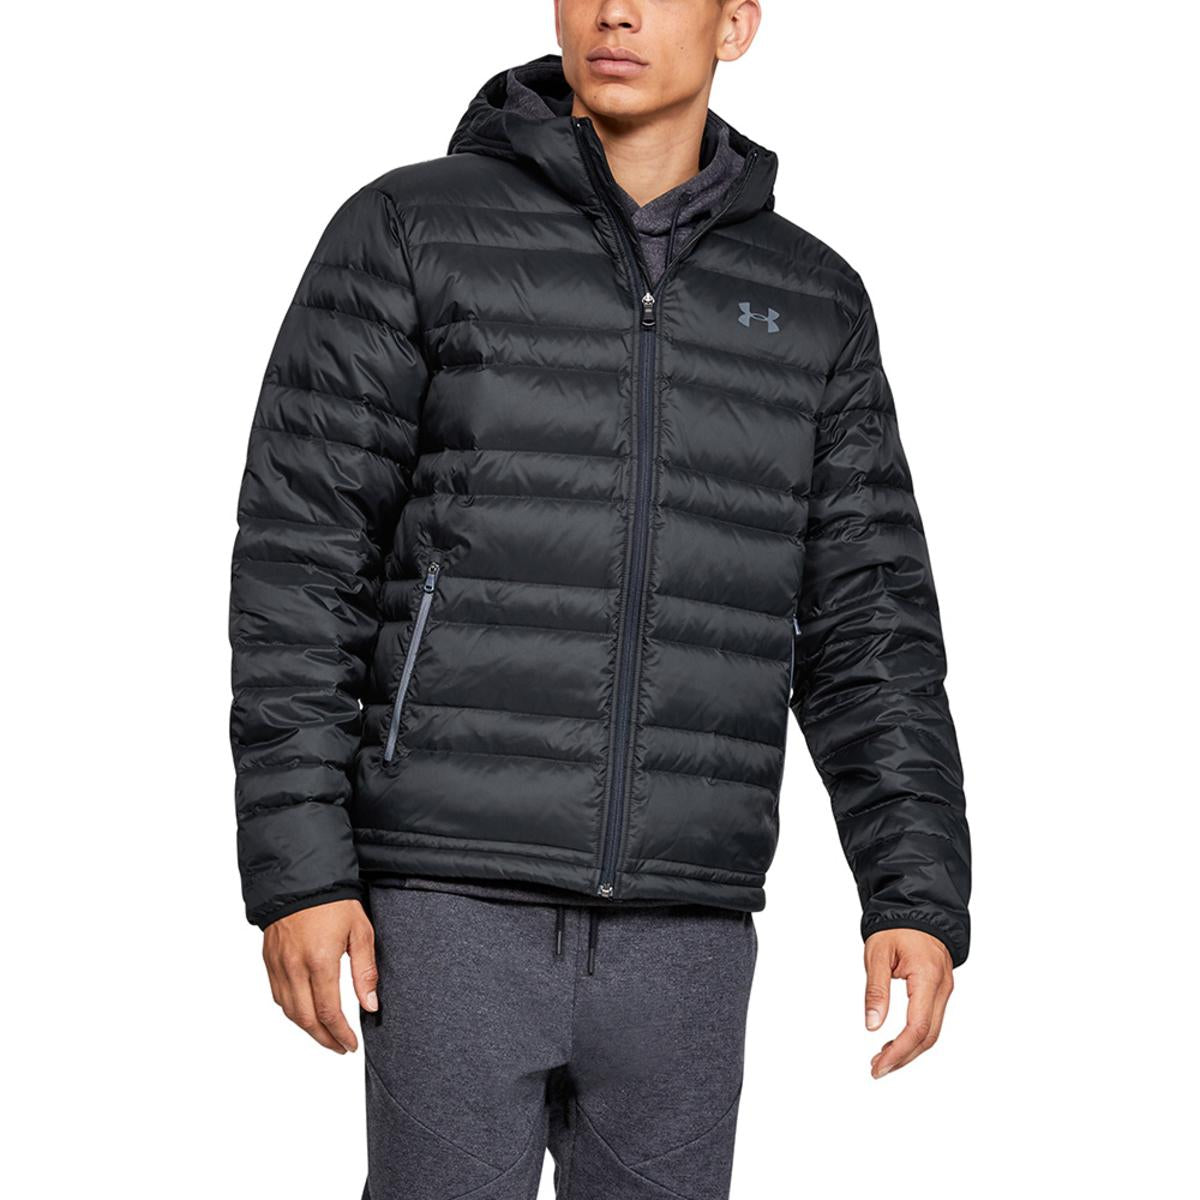 Under Armour Men's Armour Down Hooded Jacket